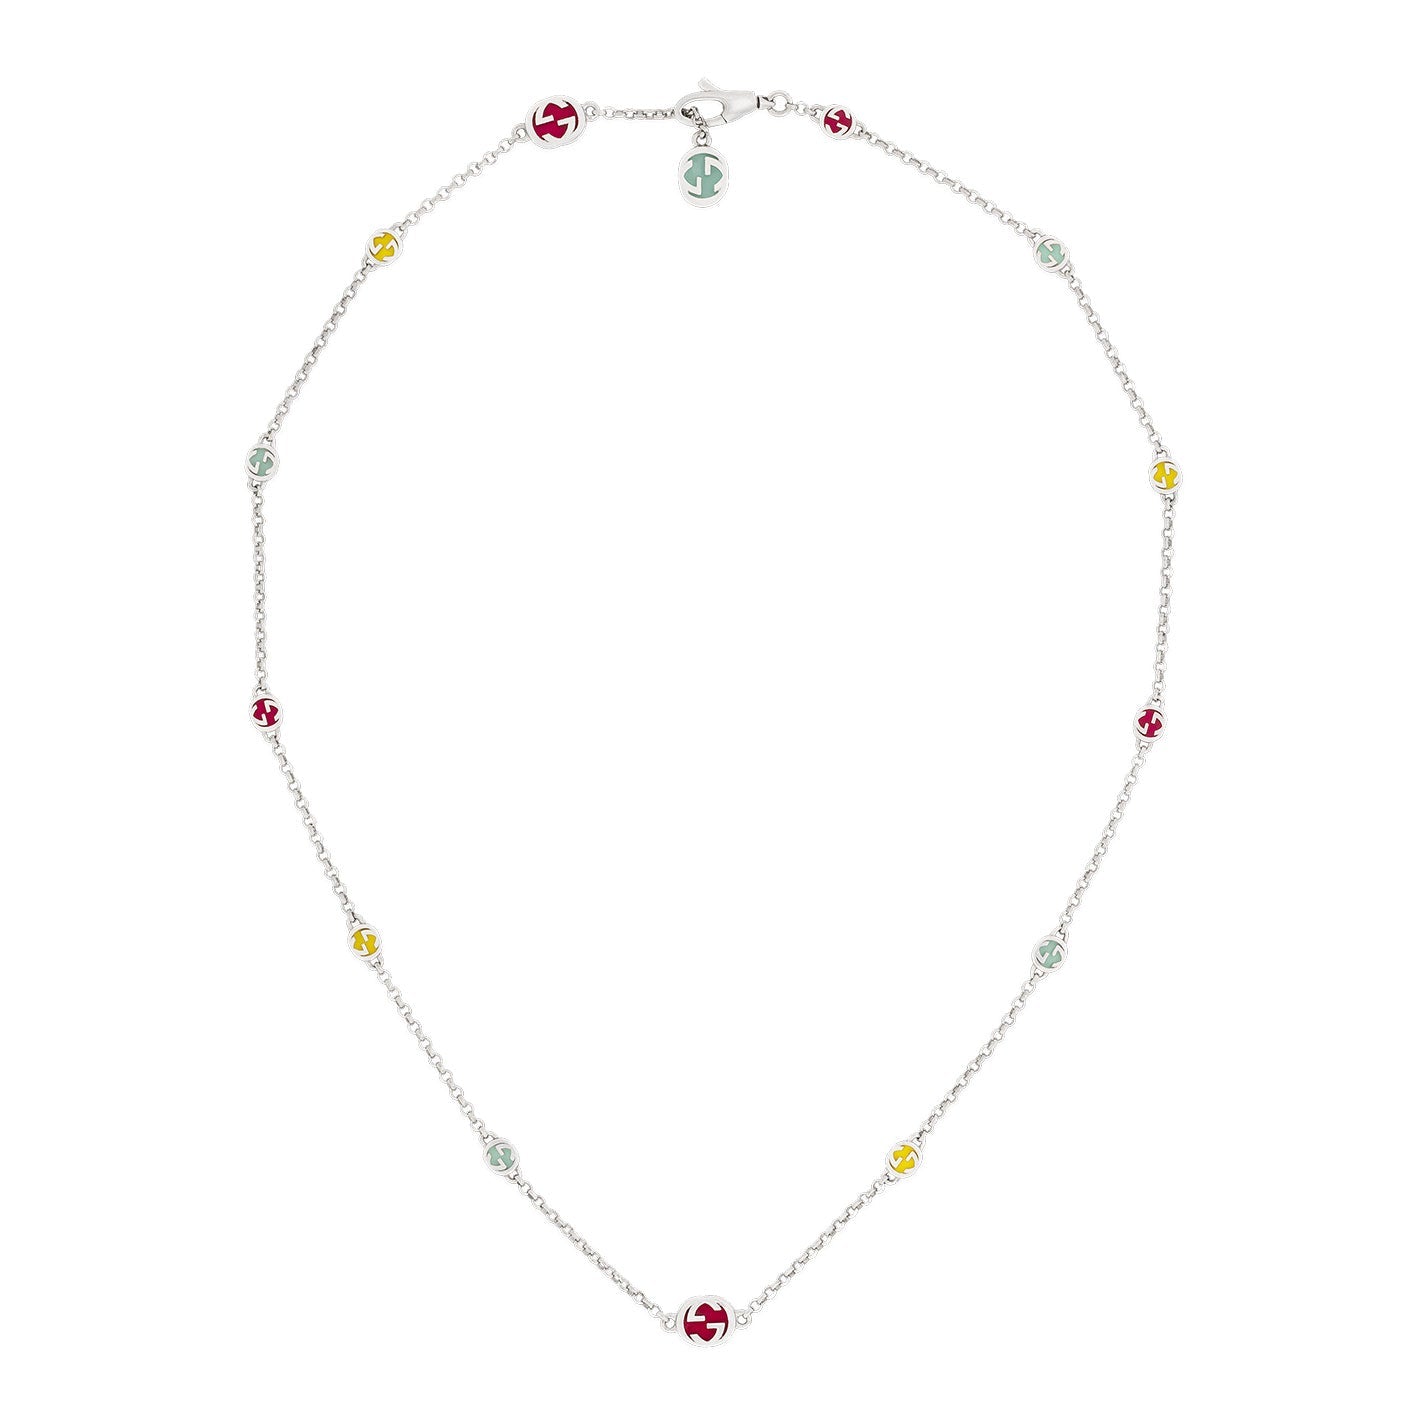 Gucci Interlocking G Sterling Silver with Multicolour Enamel Station Necklace